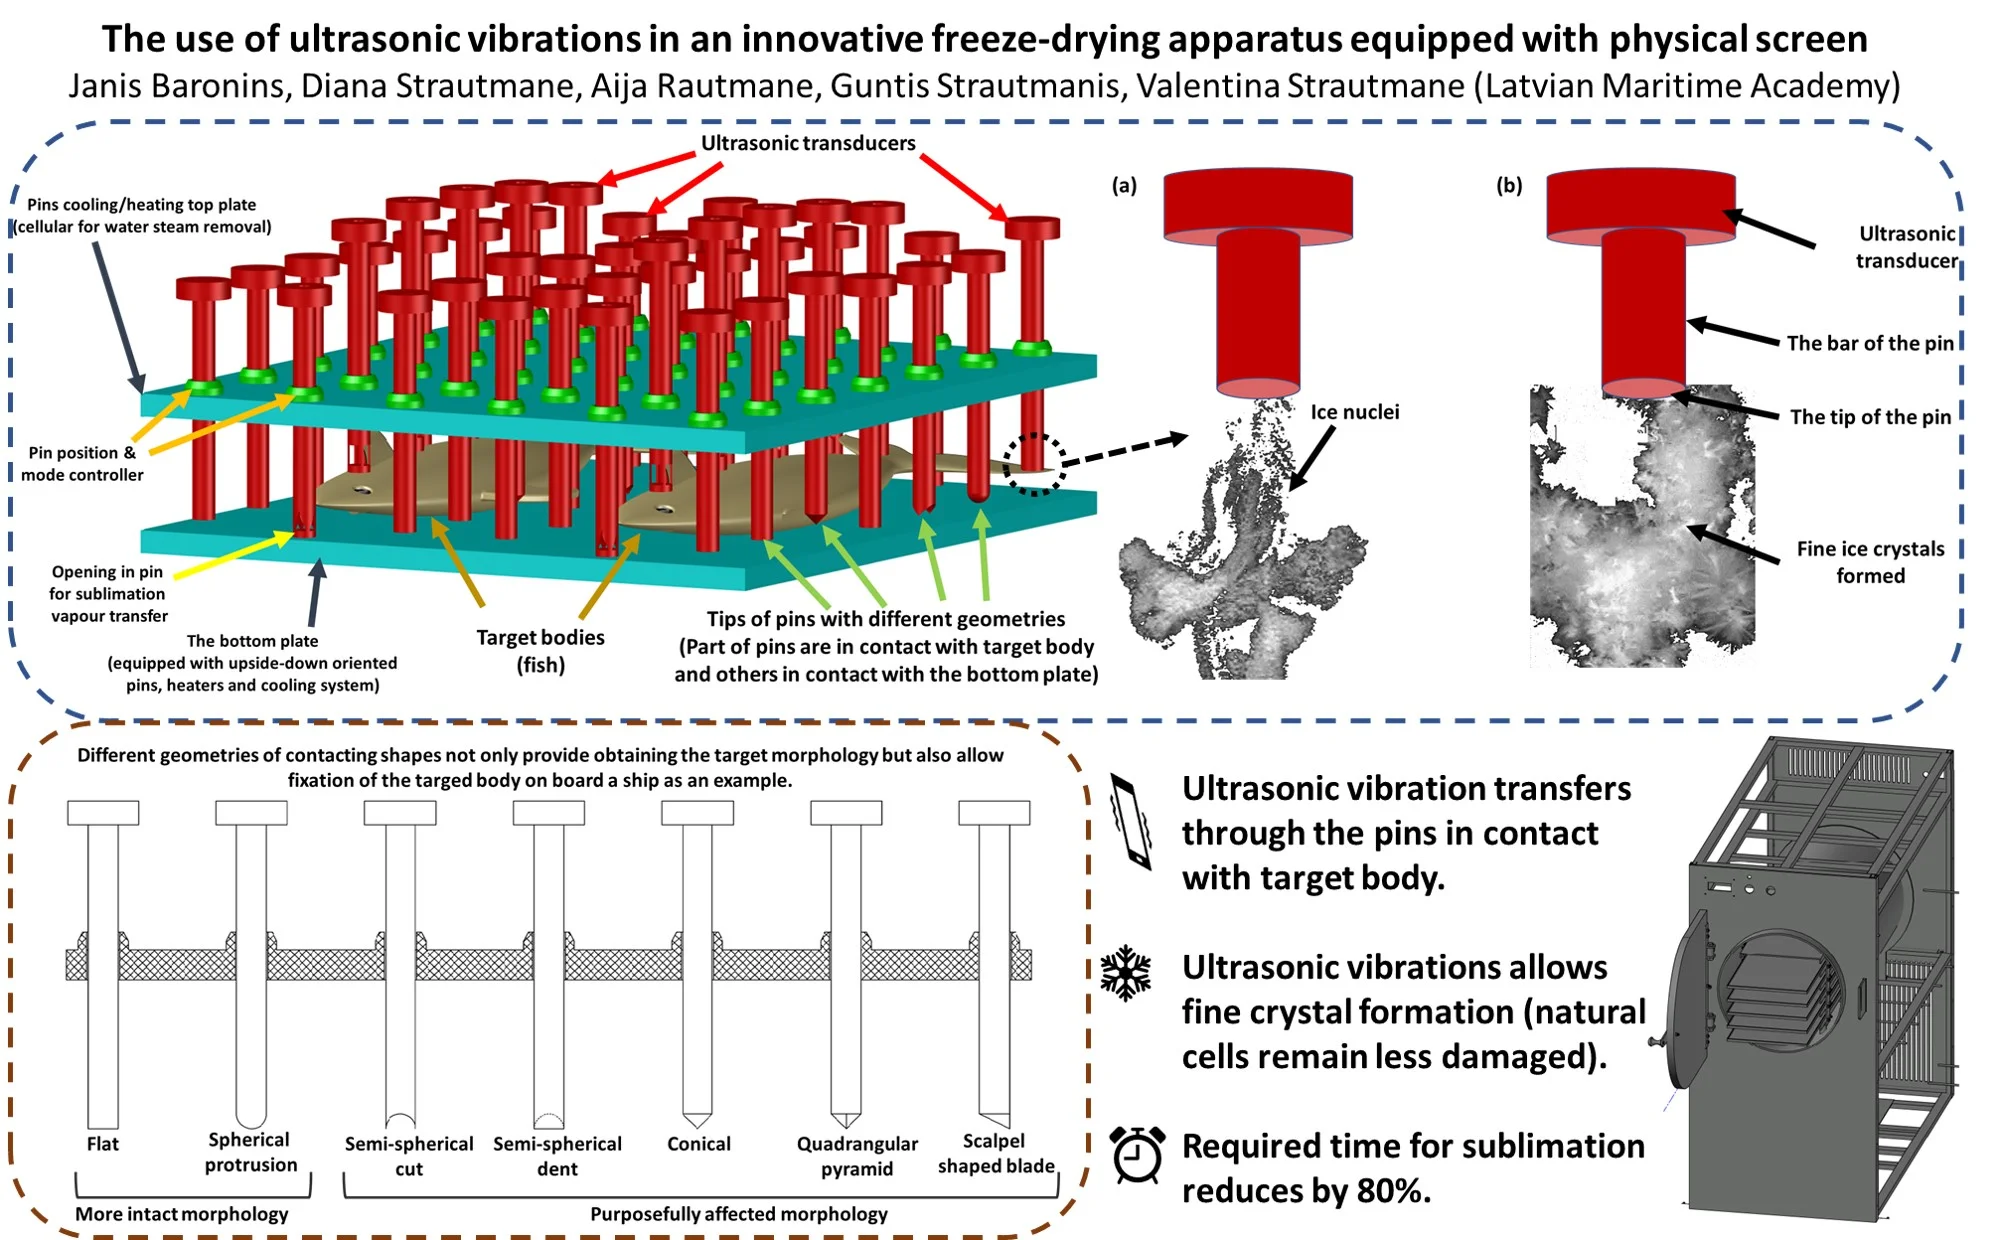 The use of ultrasonic vibrations in an innovative freeze-drying apparatus equipped with physical screen